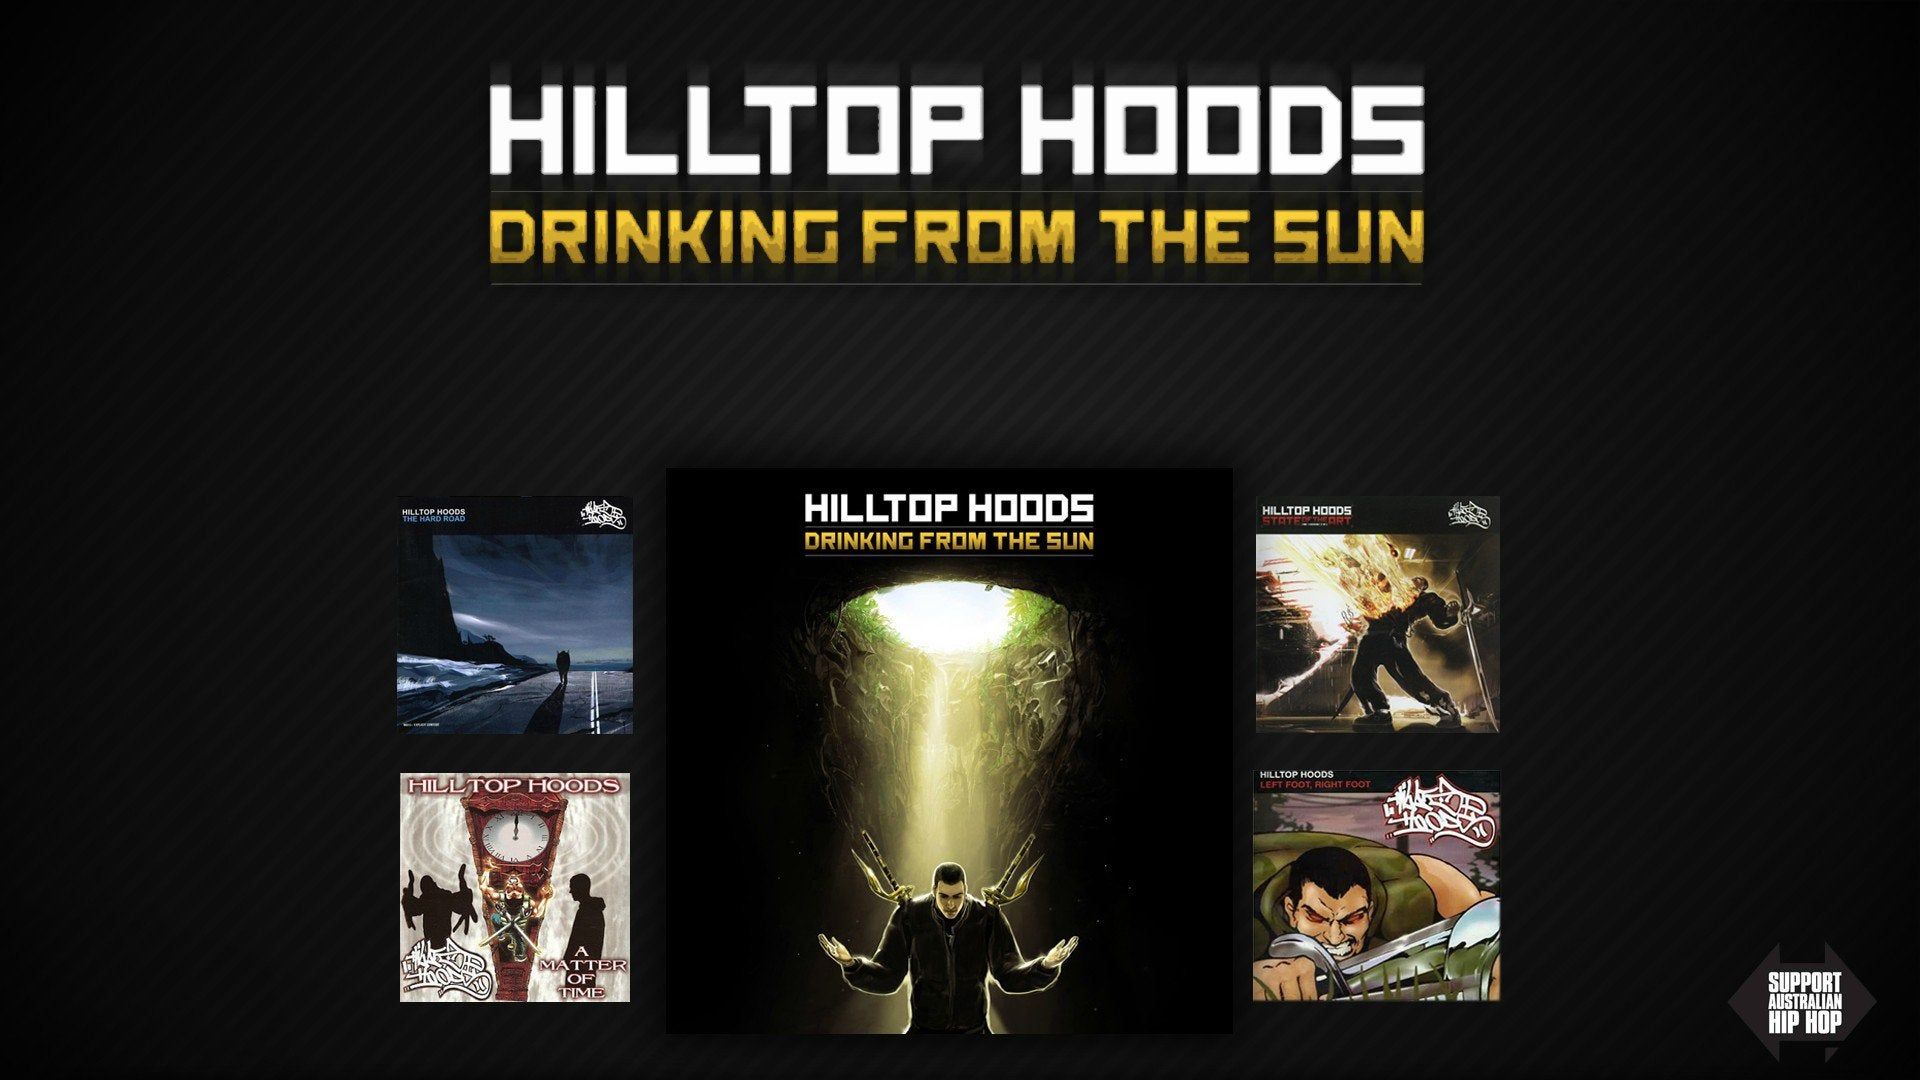 To celebrate the new Hilltop Hoods album, I made a wallpaper. [1920x1080]